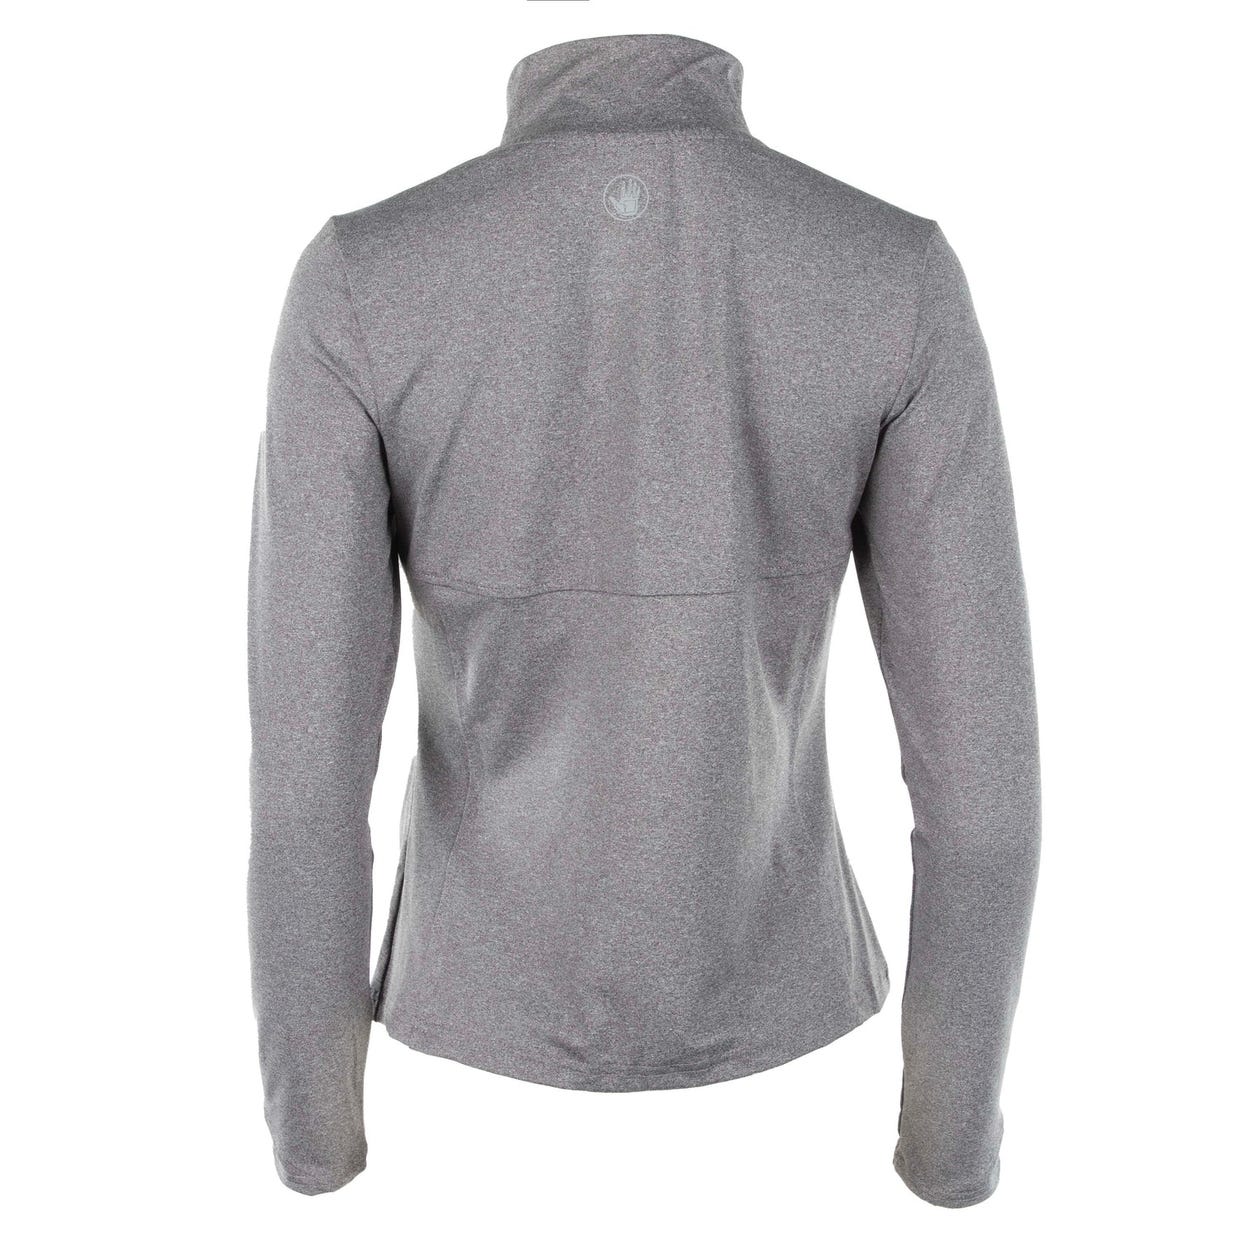 Heather gray full-zip jacket with long sleeves and a high collar, featuring a small circular logo on the back just below the neckline.